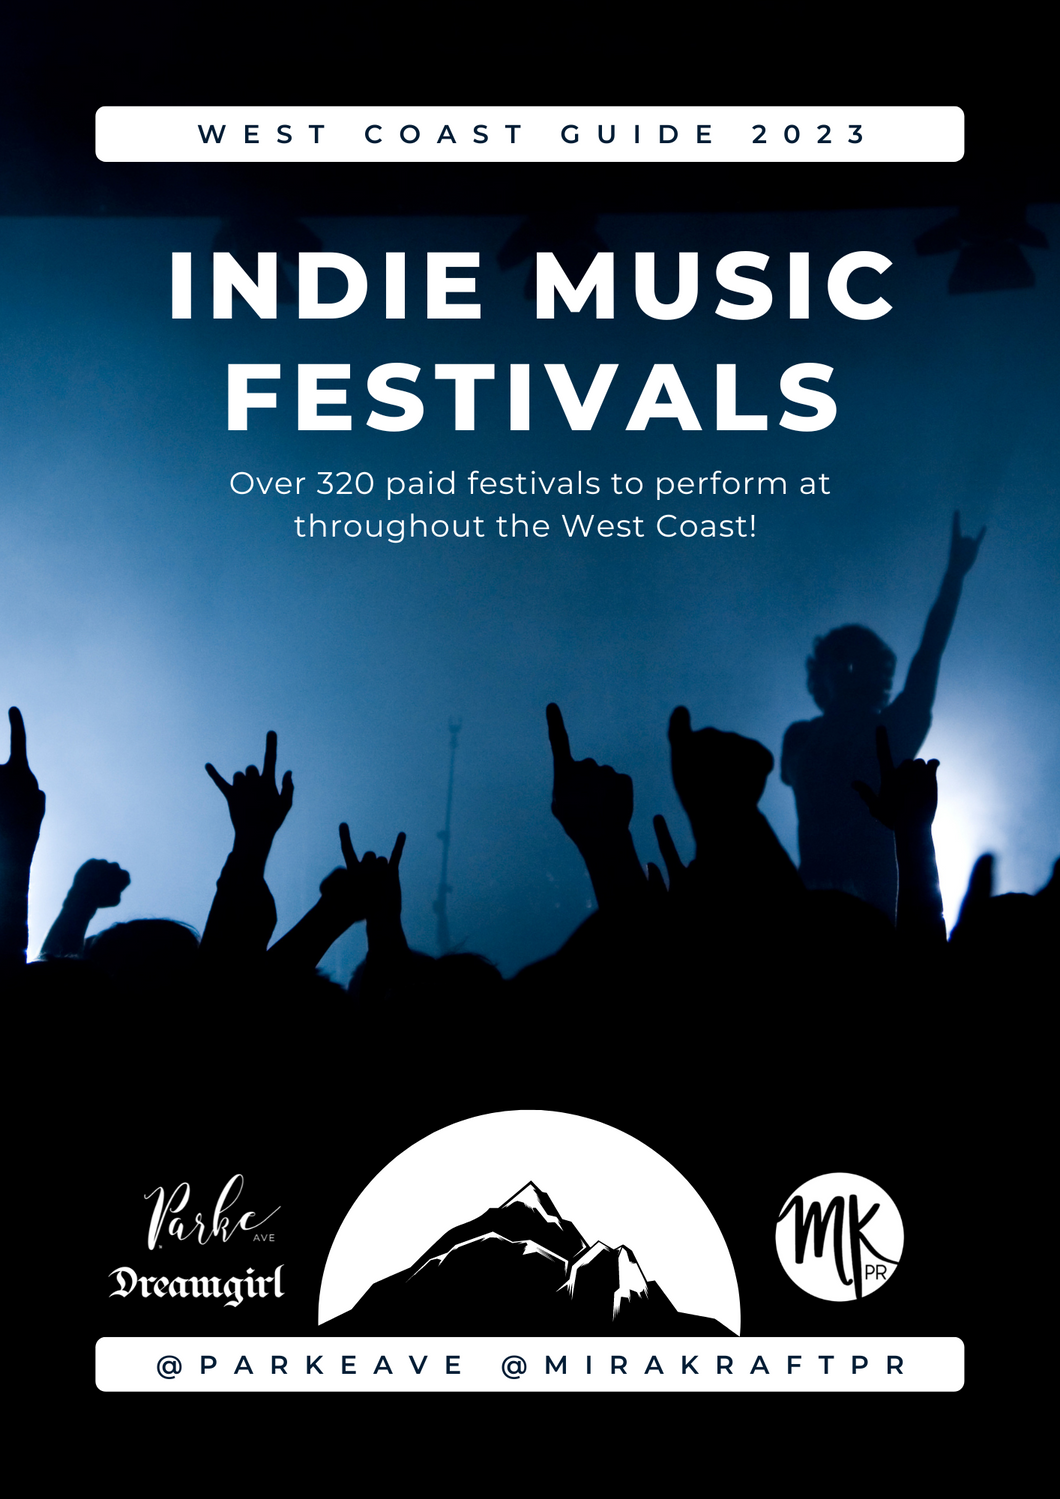 West Coast Indie Music Festival Directory